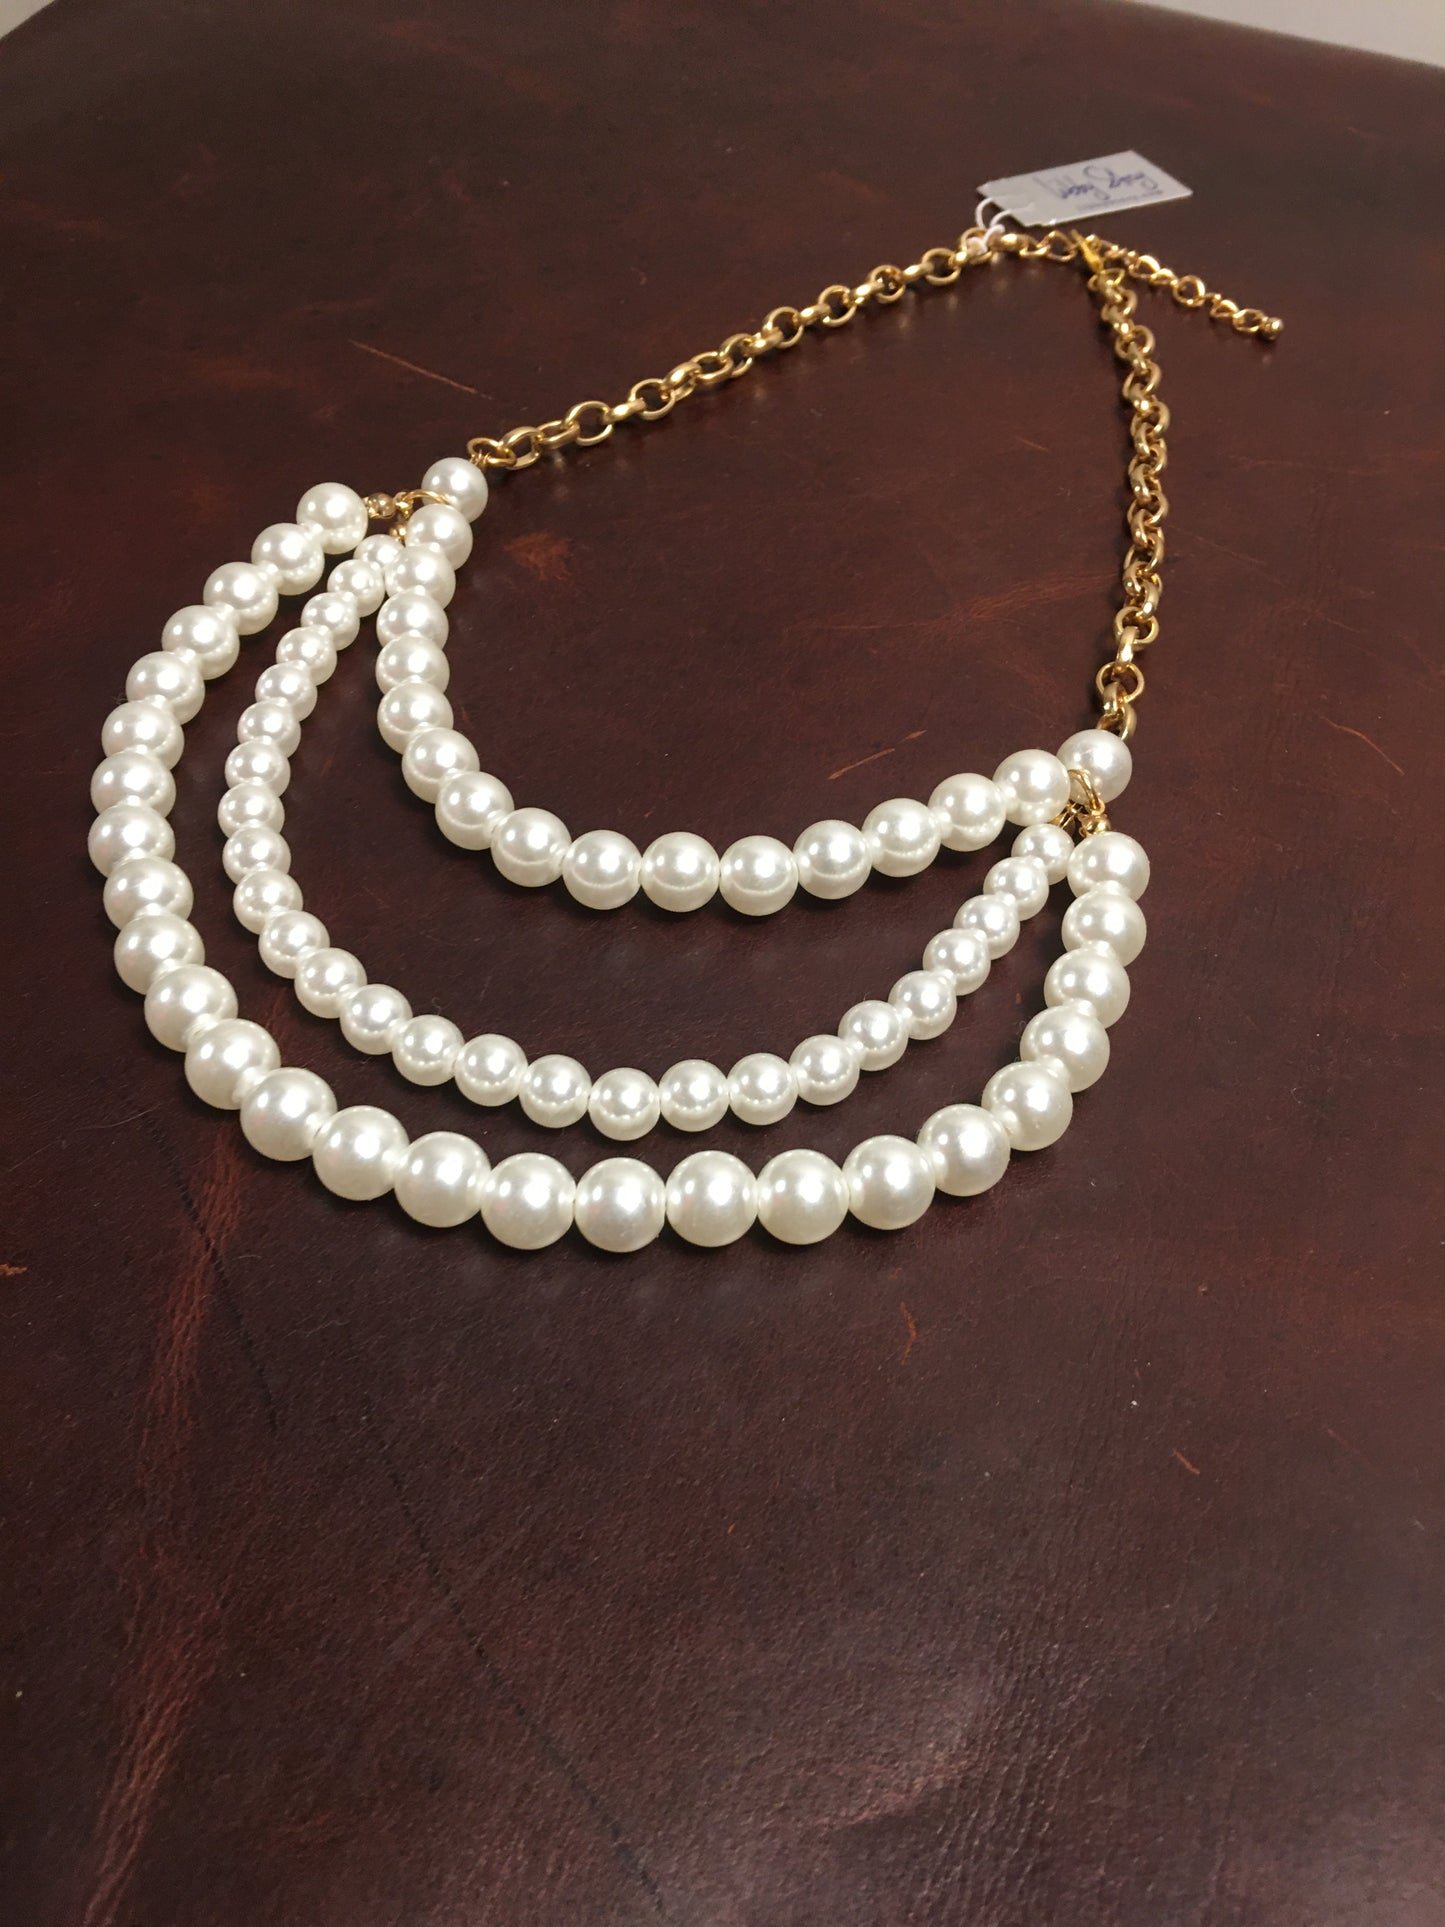 LS Upcycled 3 Layered Pearl Necklace